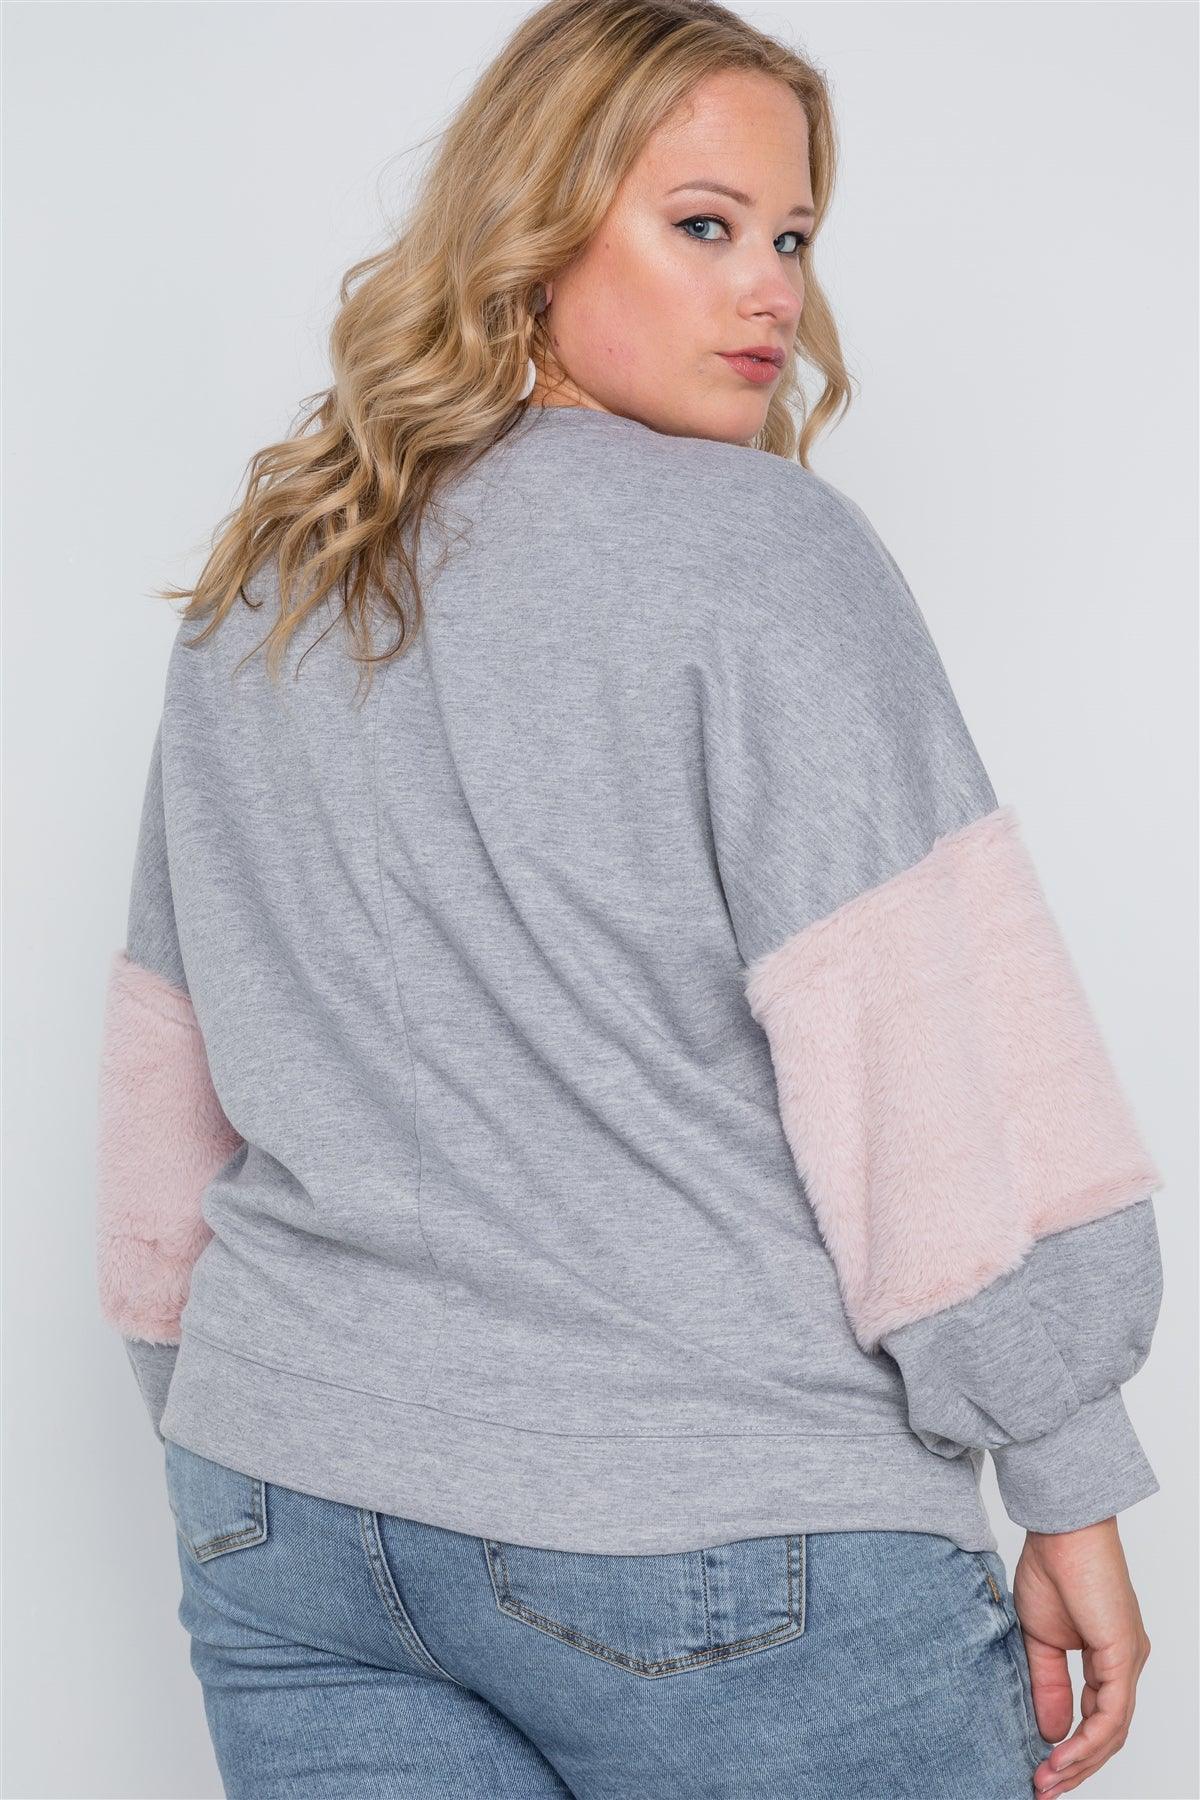 Plus Size Heather Grey Faux Fur Pink Sleeves Sweater /1-1-1